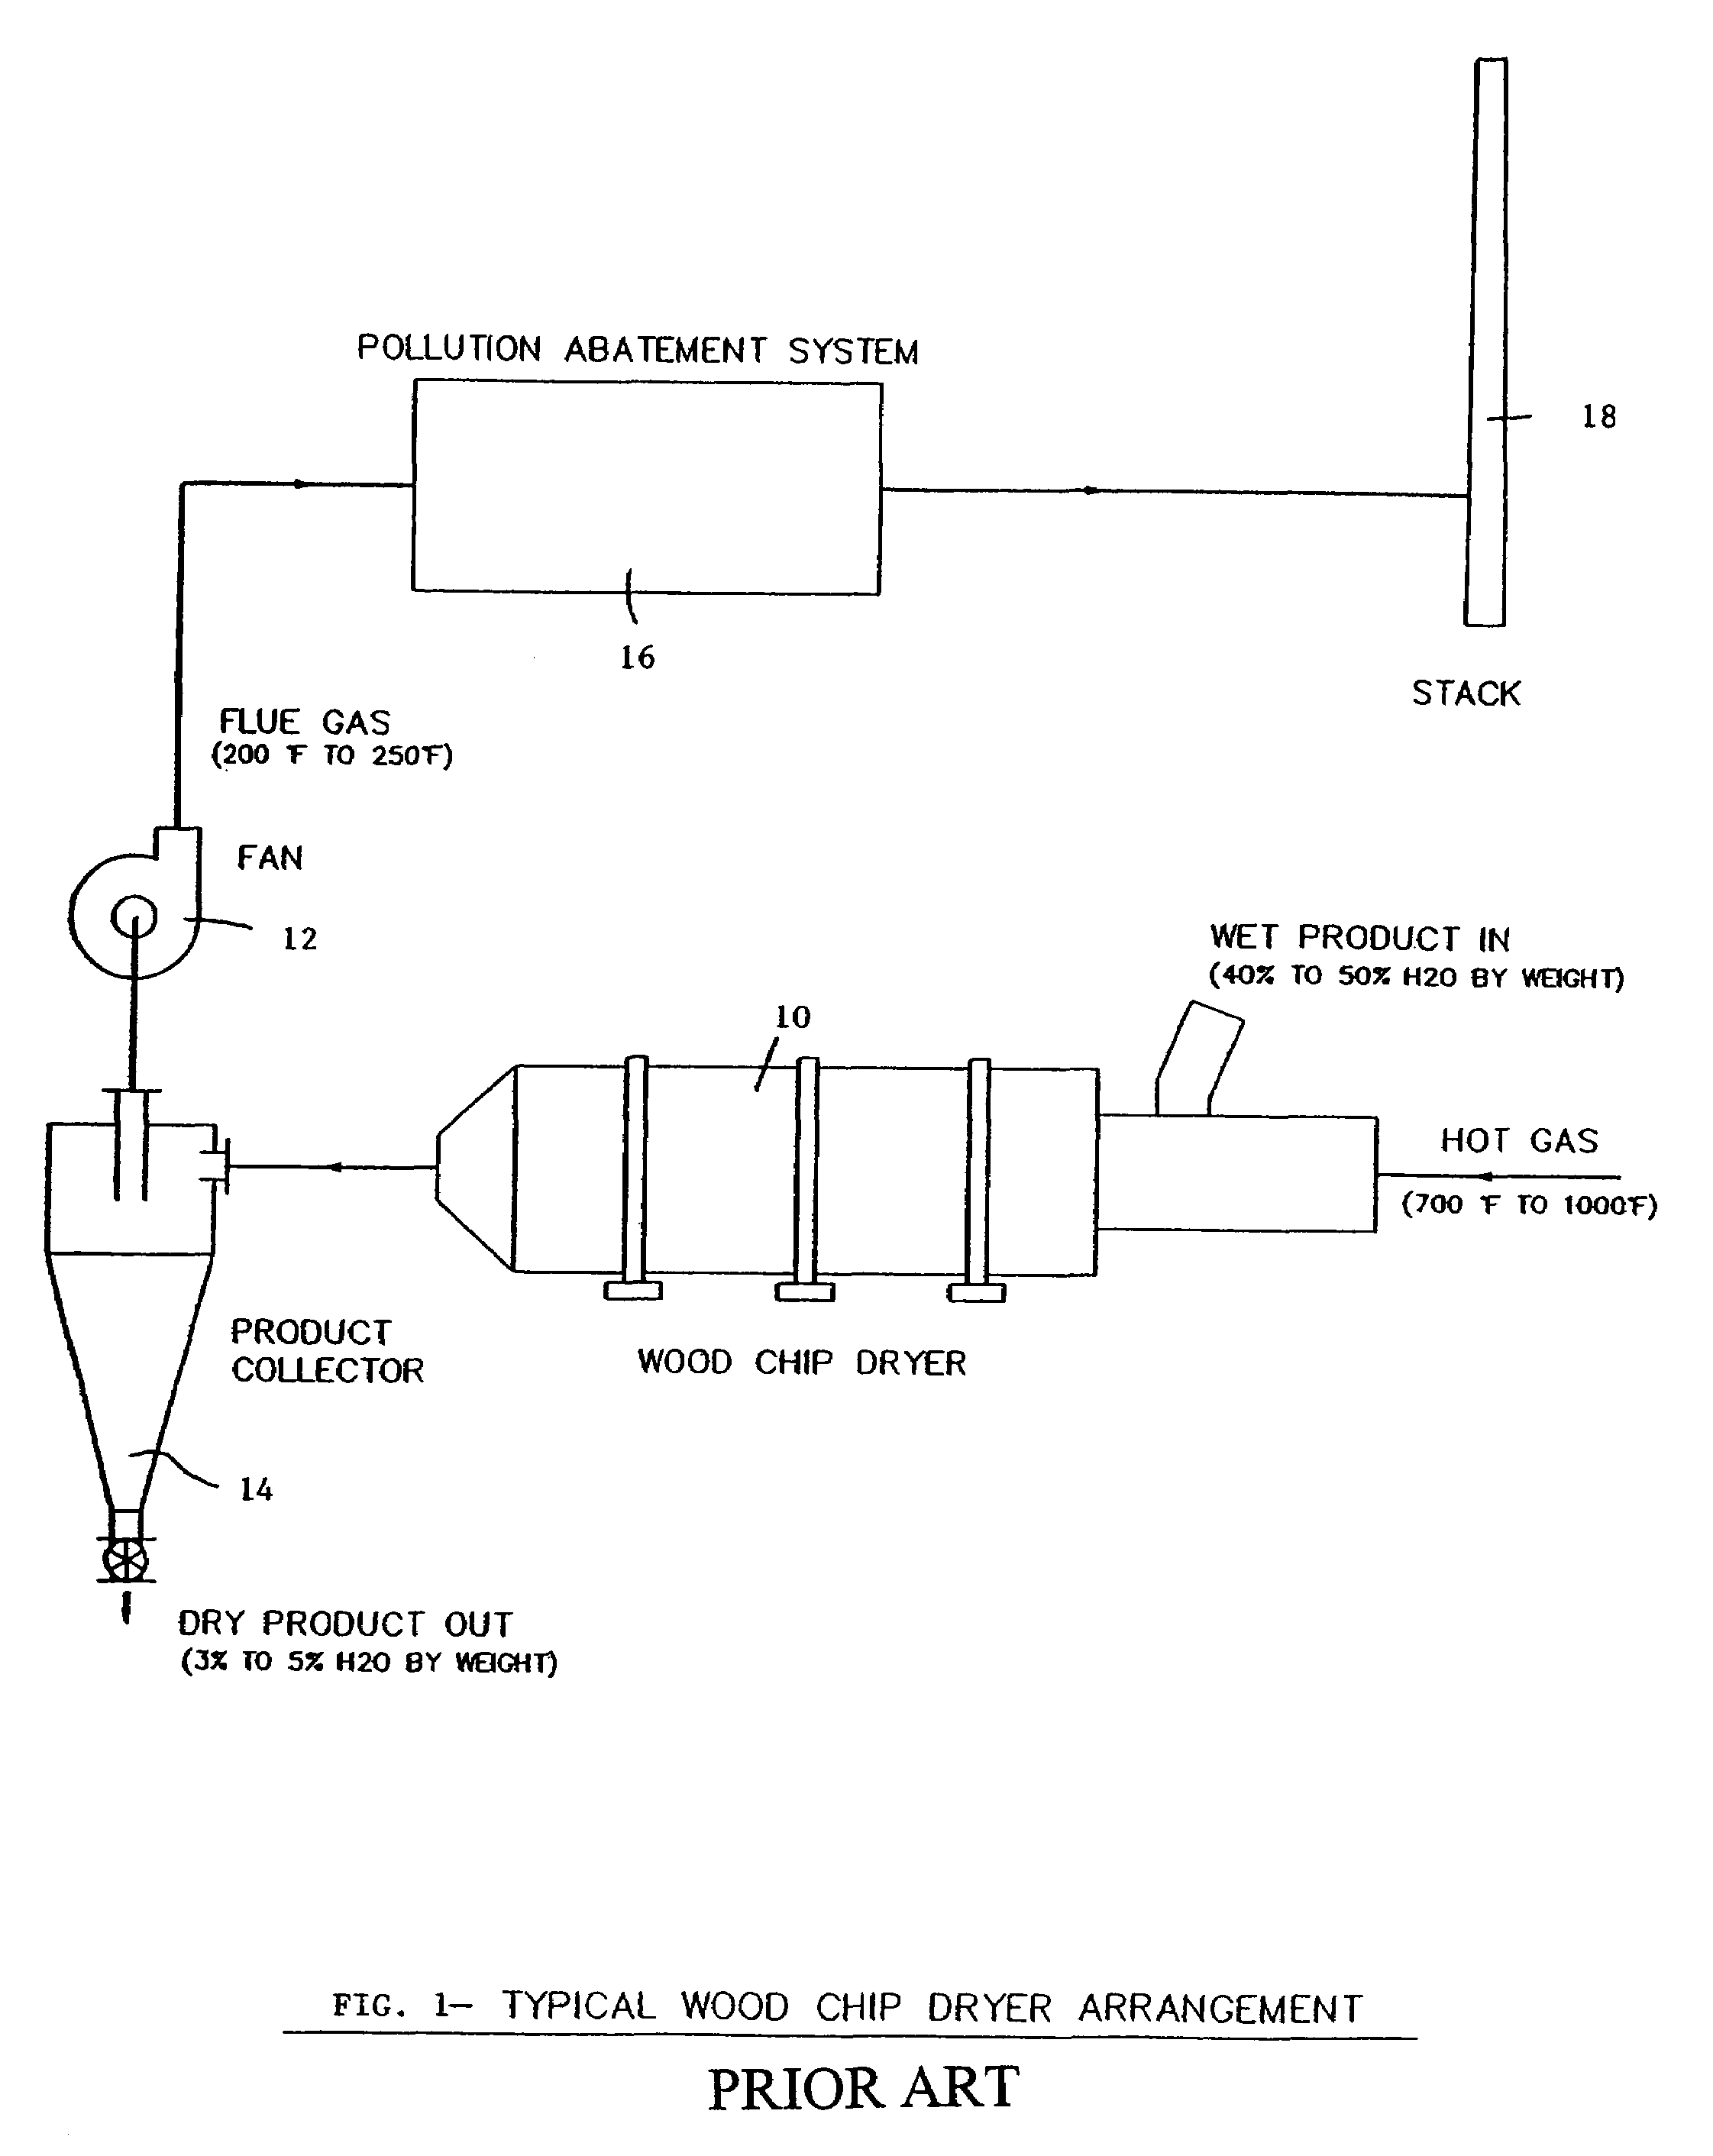 Apparatus and method using an electrified filter bed for removal of pollutants from a flue gas stream